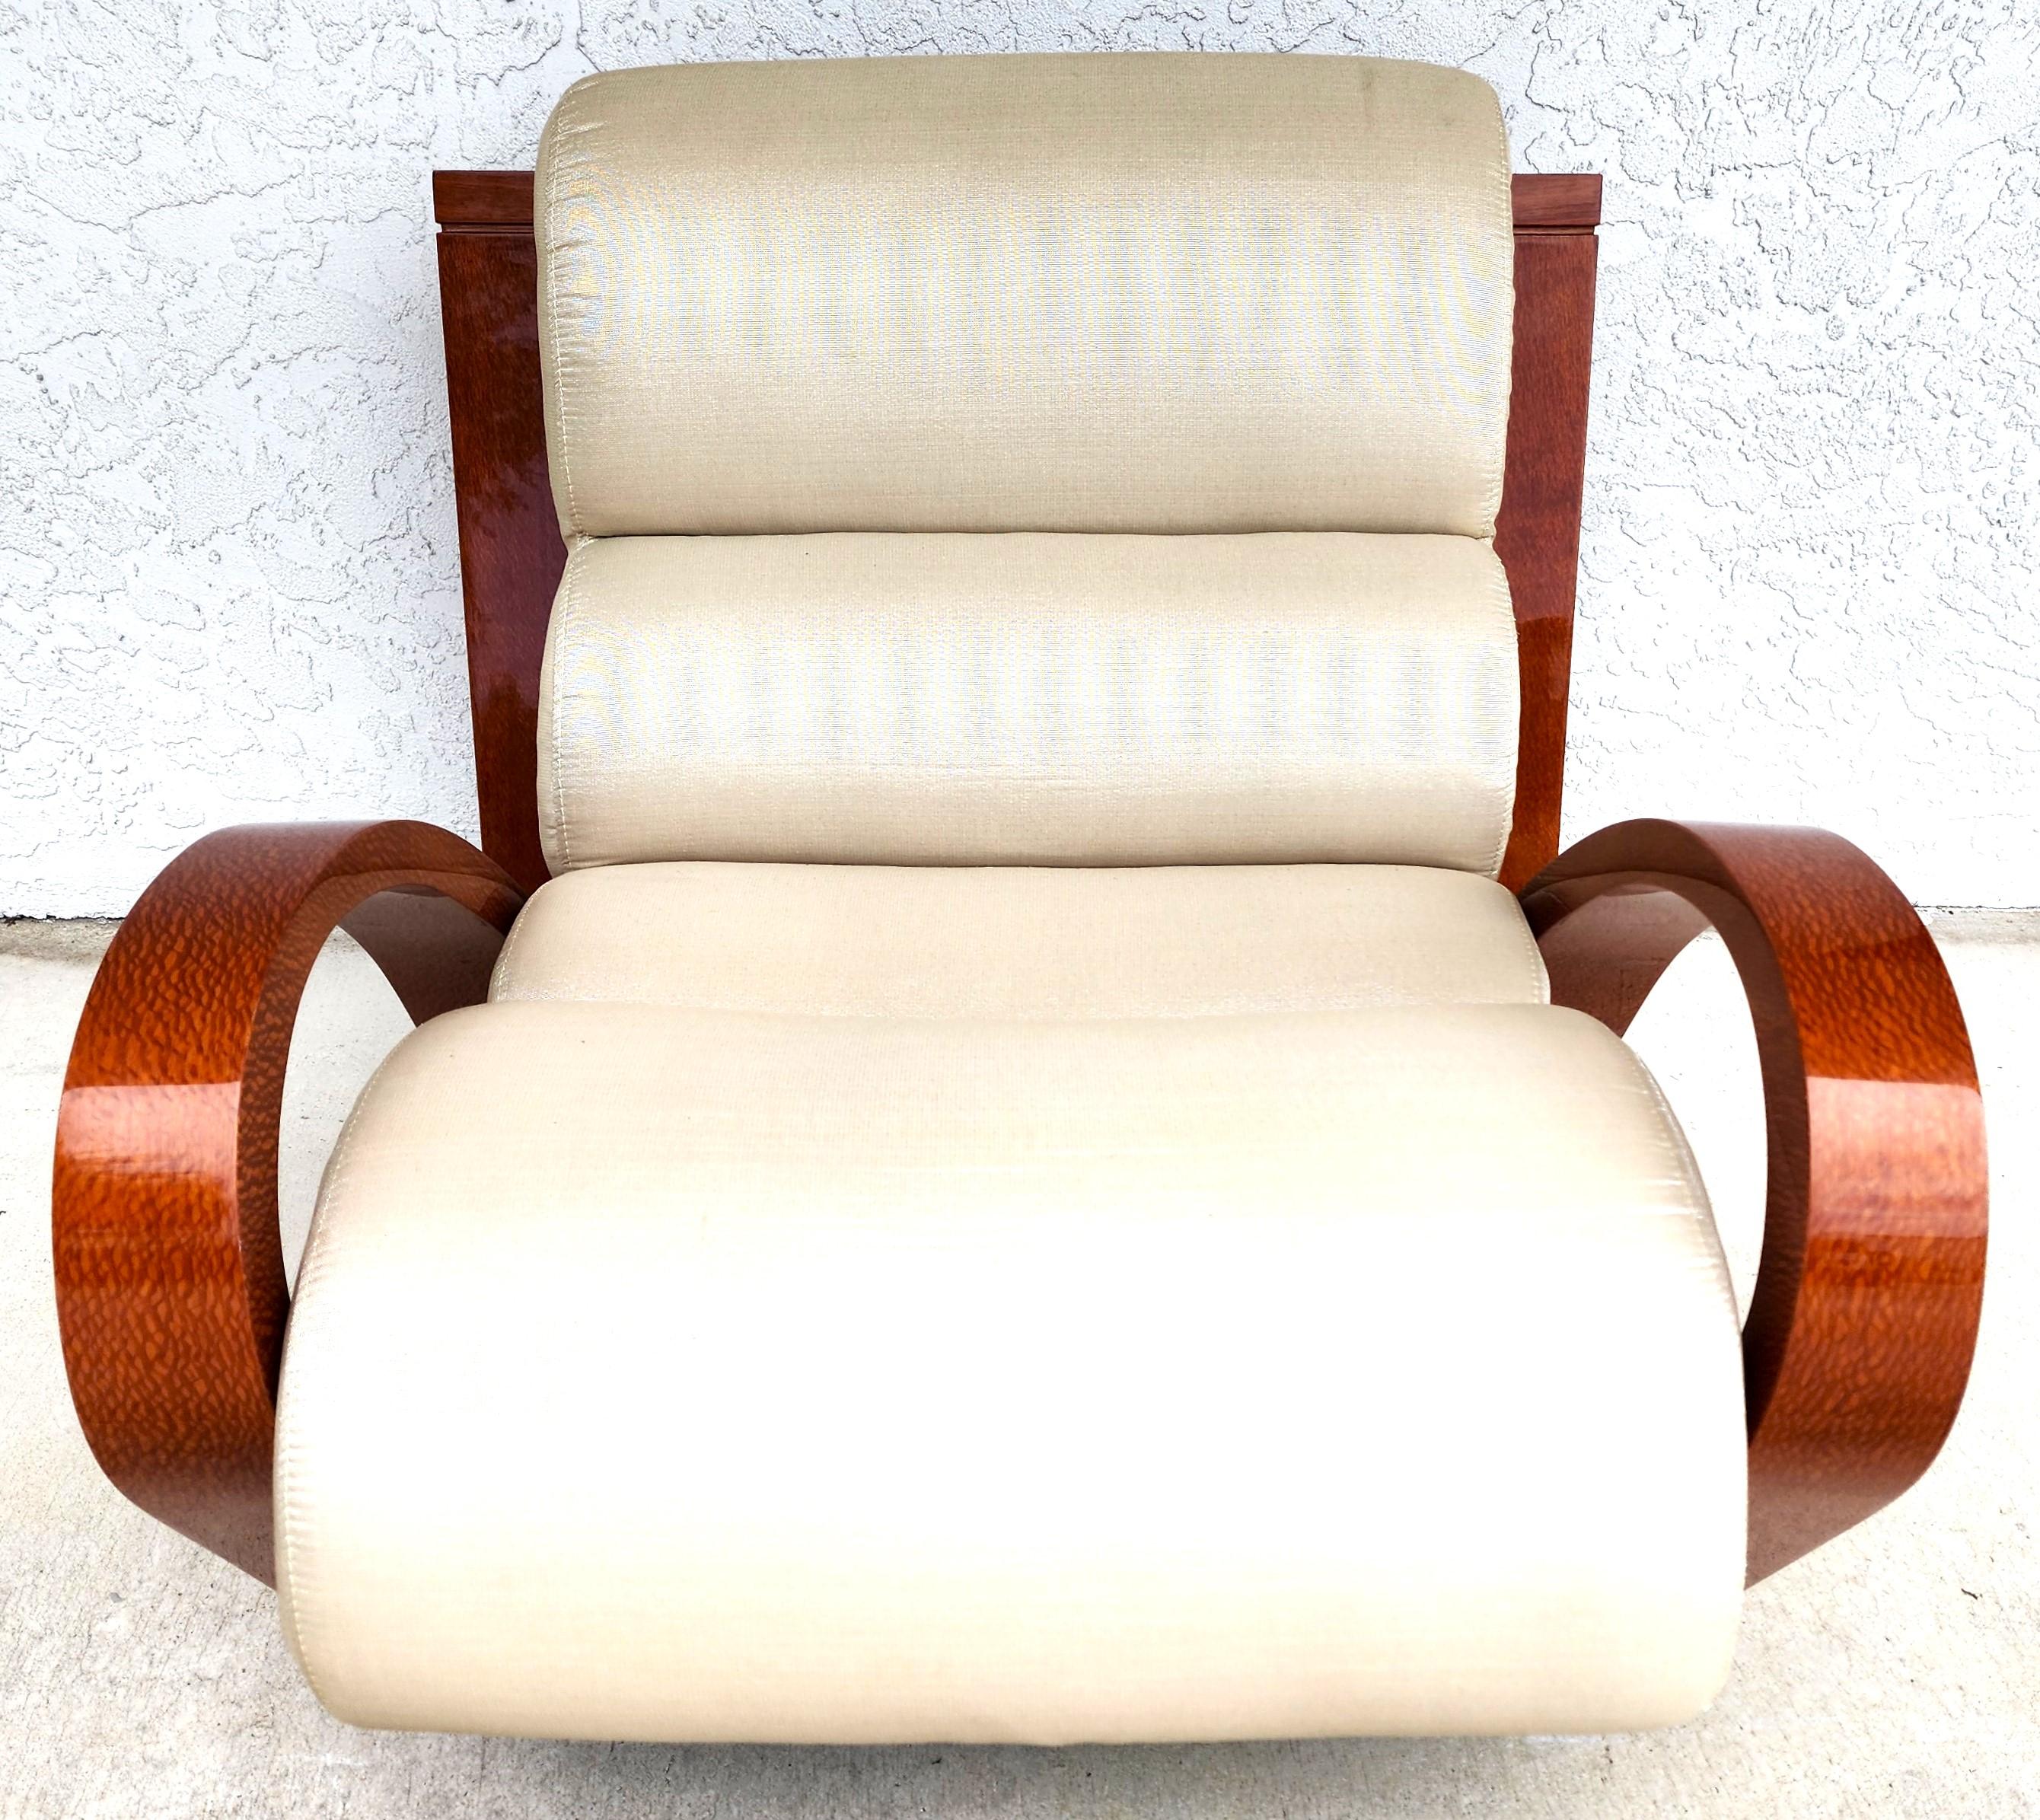 For FULL item description click on CONTINUE READING at the bottom of this page.

Offering One Of Our Recent Palm Beach Estate Fine Furniture Acquisitions Of A
Lounge Chair in the style of Enrique Garcel Jaime Perszek 

Approximate Measurements in